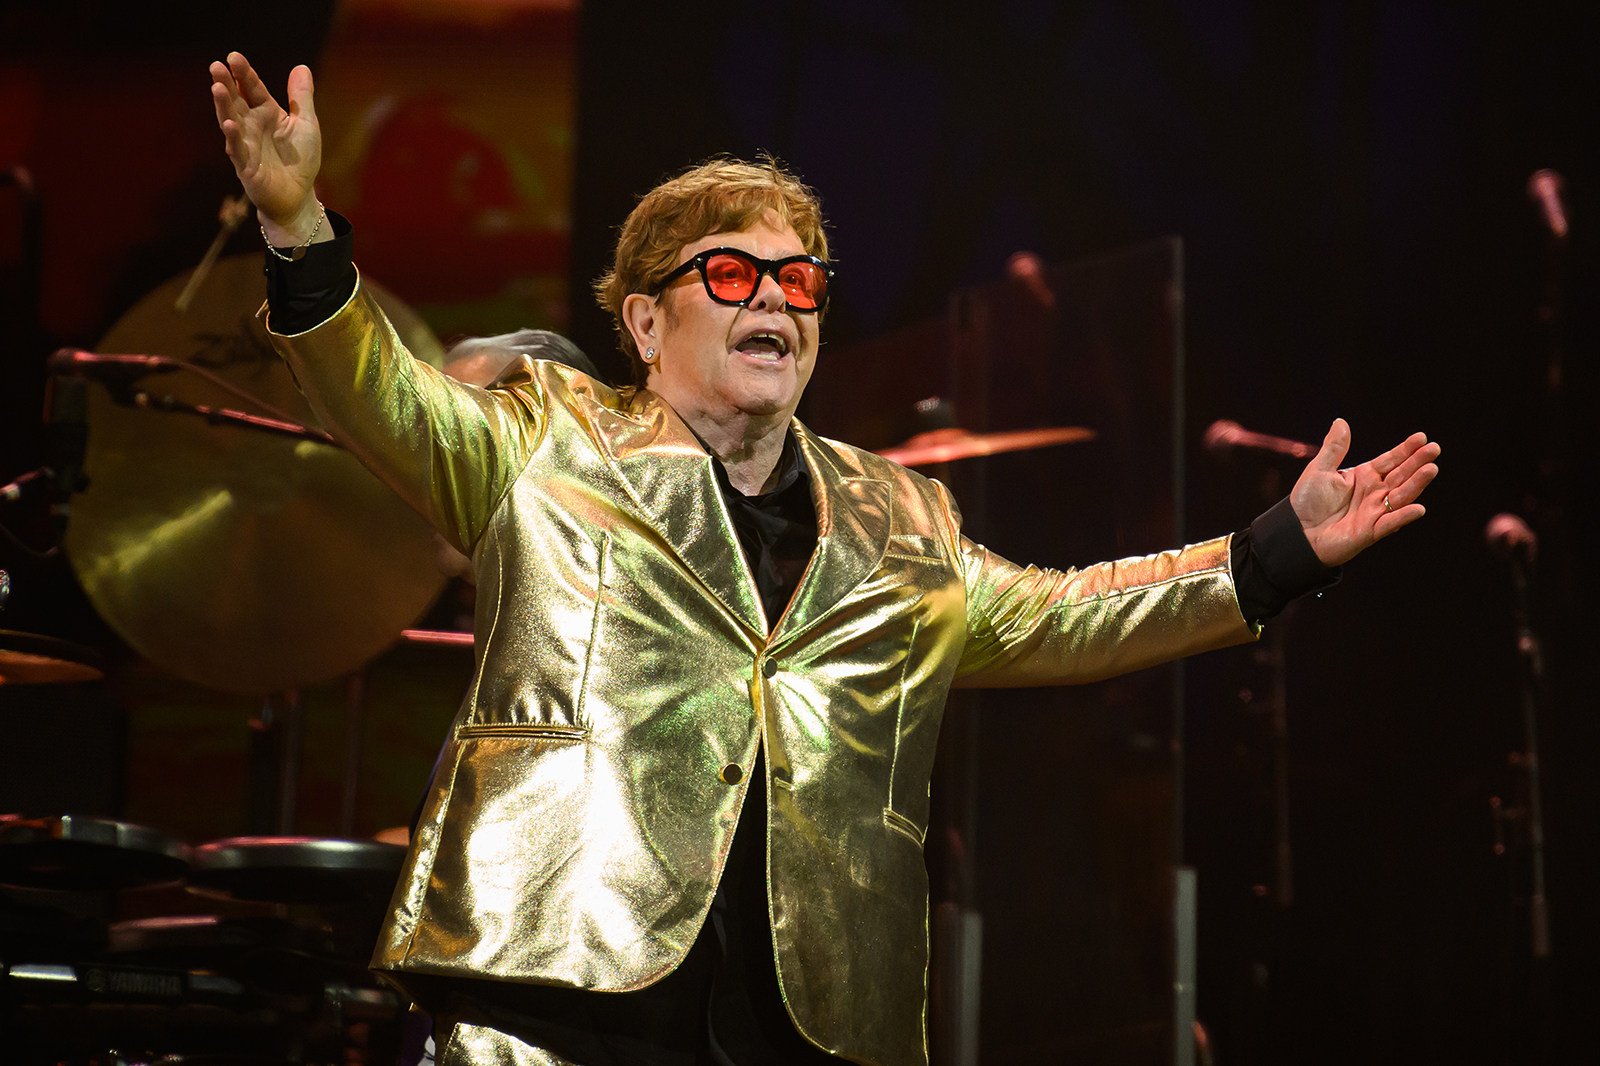 Elton John’s last concert tour, Farewell Yellow Brick Road, concluded in July 2023. Photo: Getty Images